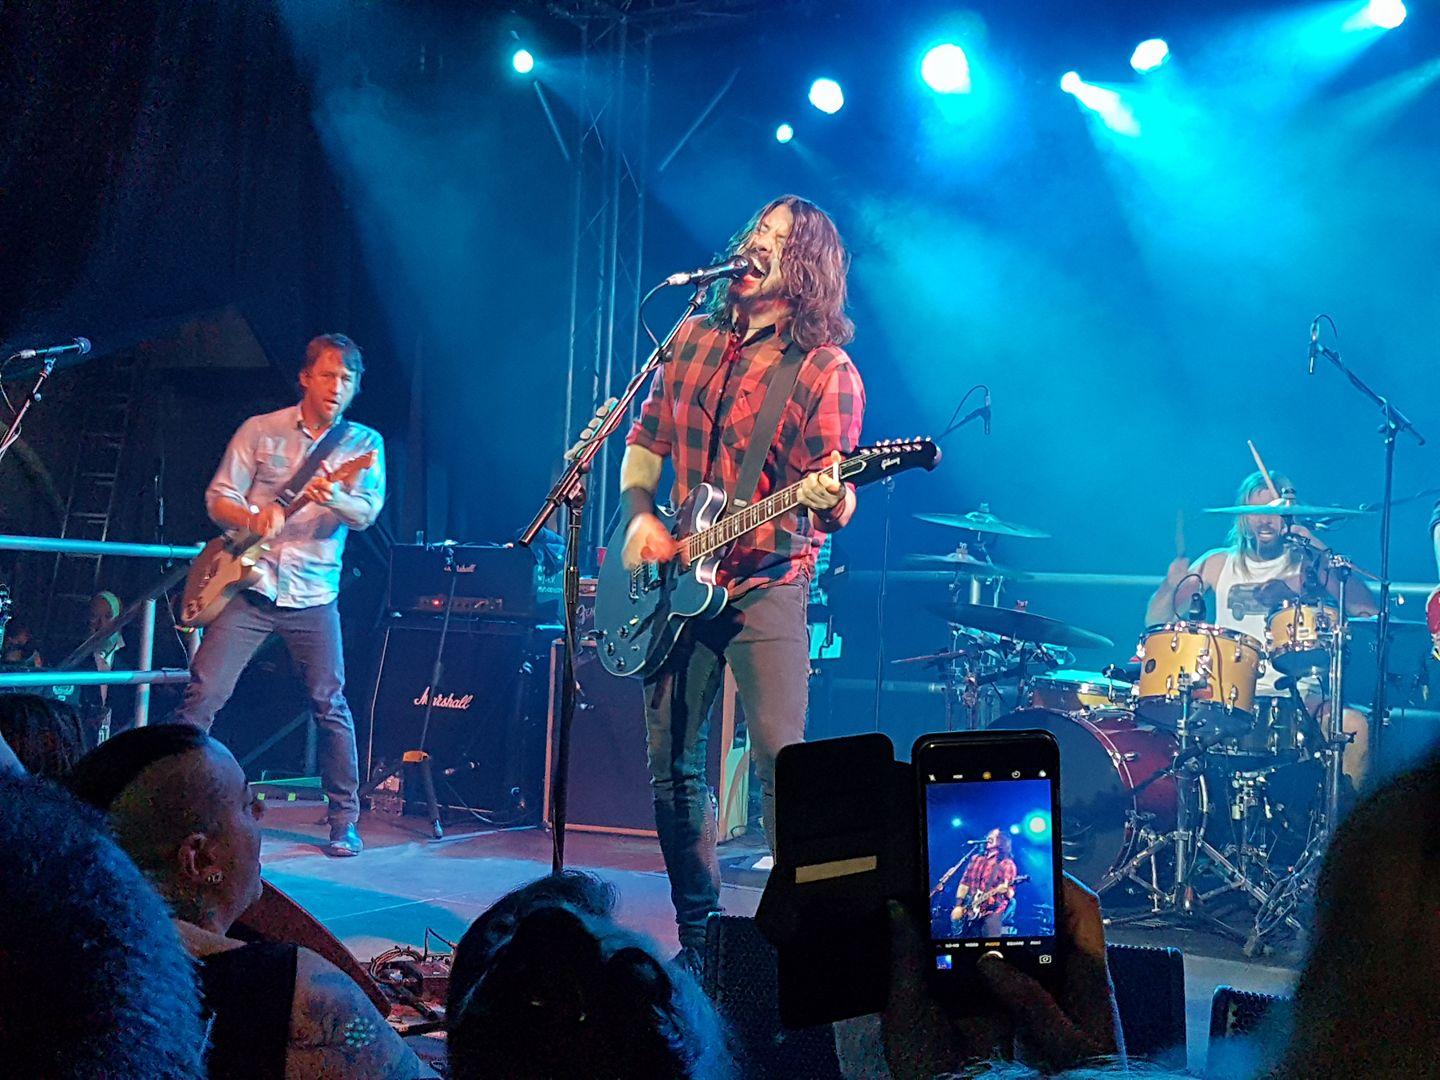 Top billing: the Foo Fighters rocked up for a surprise gig at the Cheese &amp; Grain, a non-profit social enterprise centre, in February (Cheese &amp; Grain)